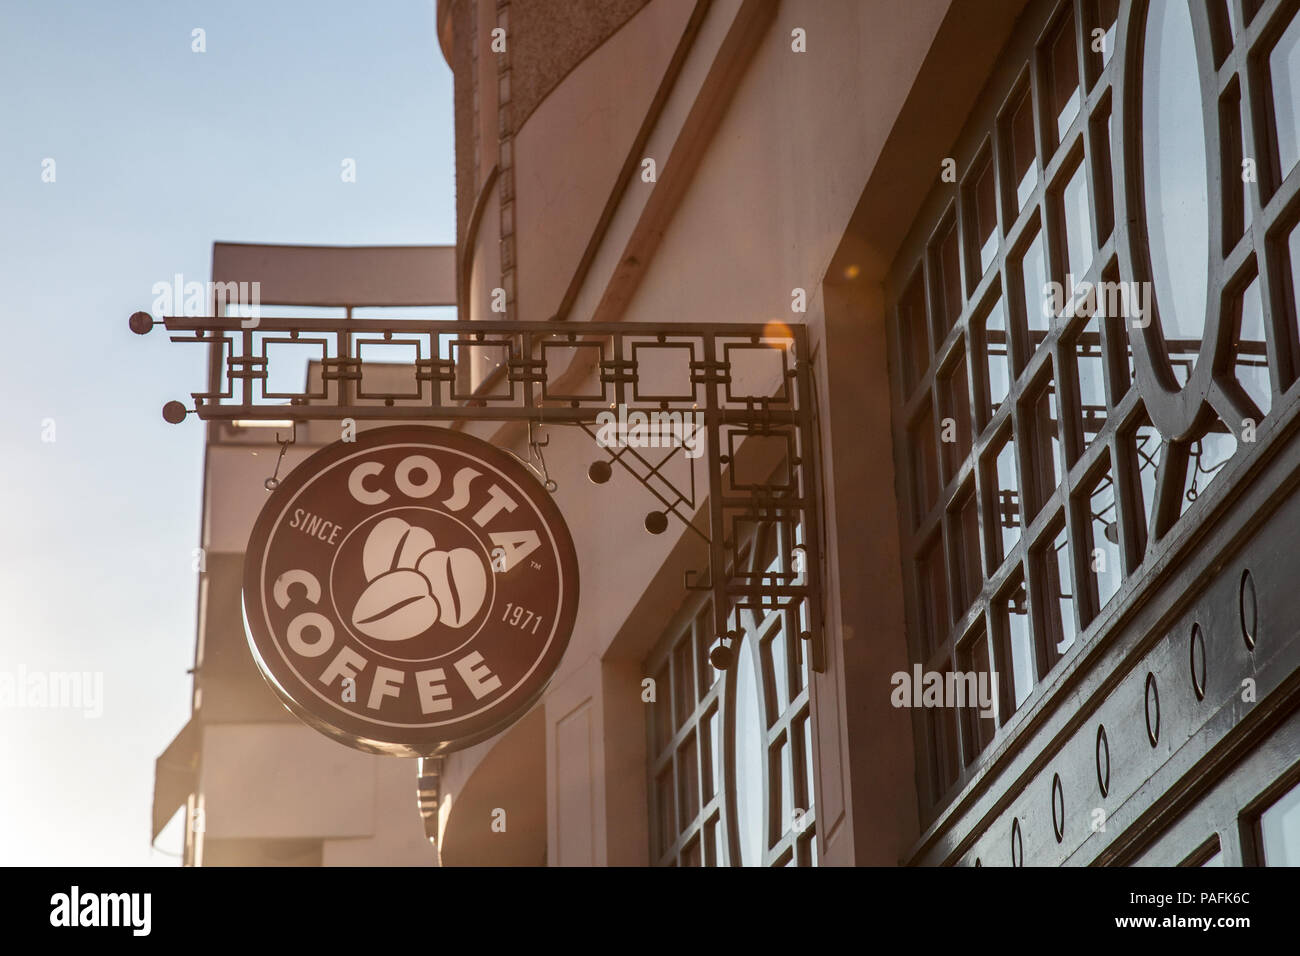 SZEGED, HUNGARY - JULY 3, 2018: Costa Coffee Logo on their main shop and coffee house in Szeged. Costa Coffee is a British multinational coffeehouse c Stock Photo